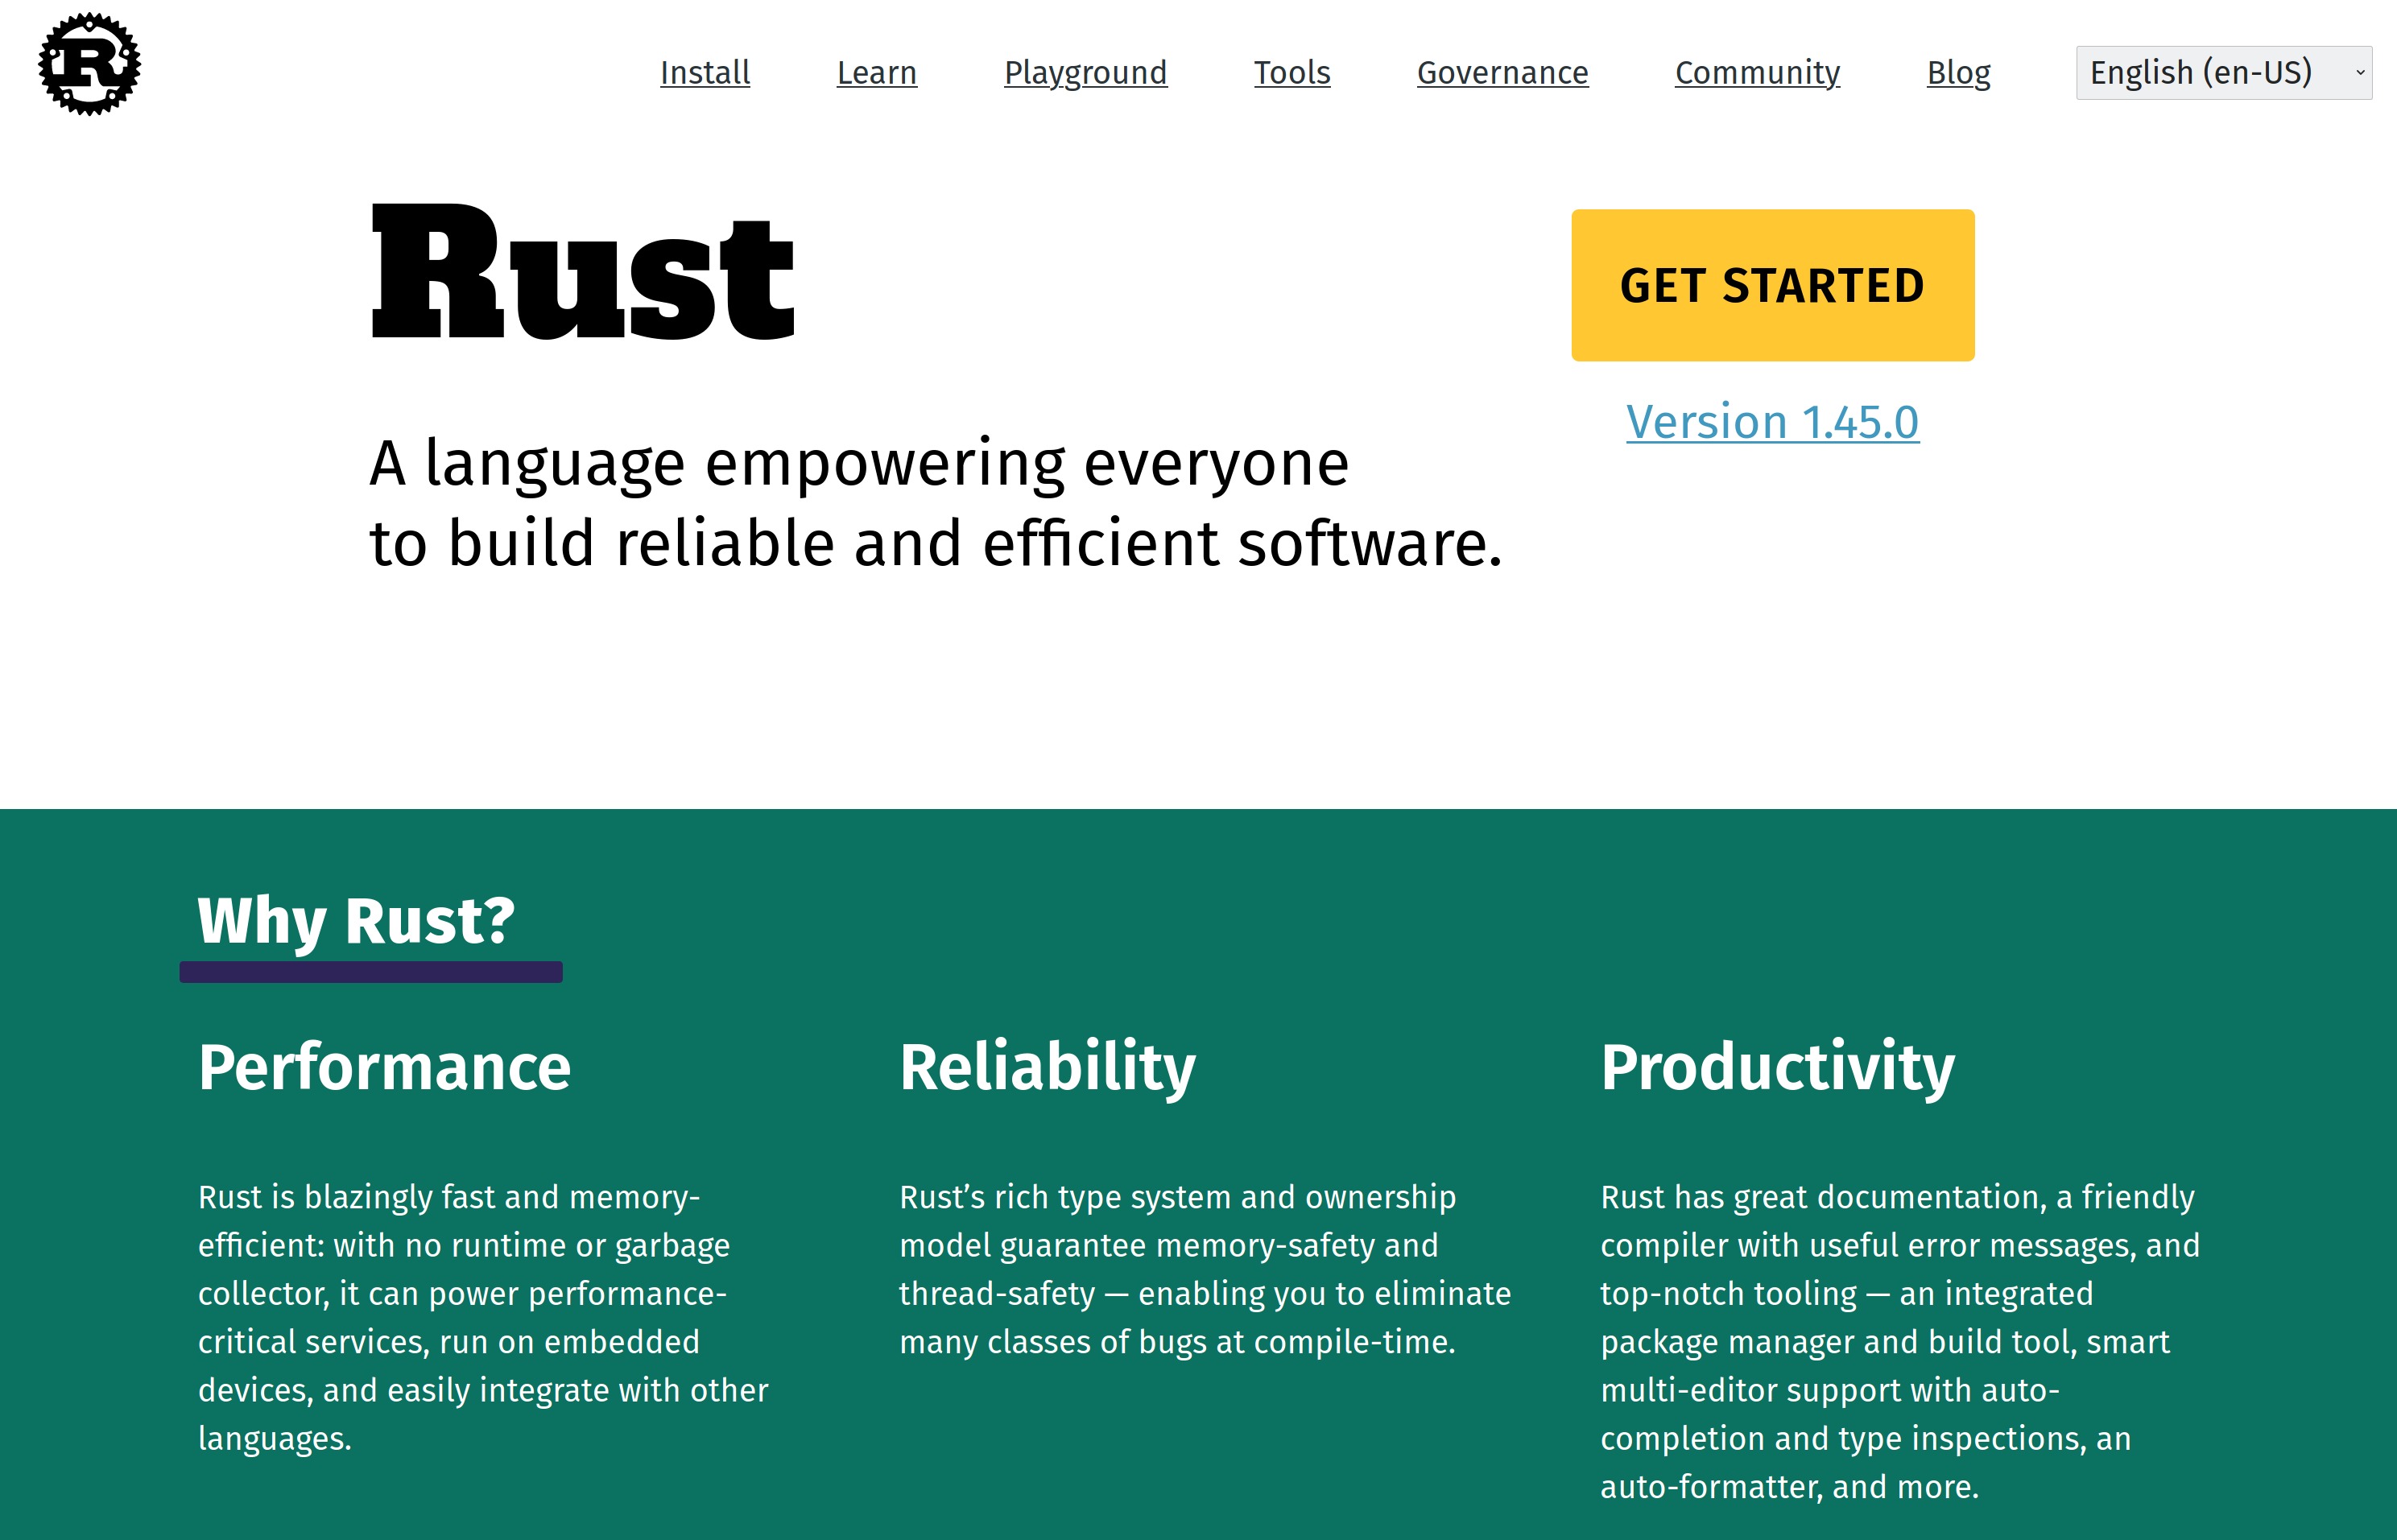 A screenshot of the rust-lang.org website in mid-2020. The headline reads "A language empowering everyone to build reliable and efficient software." and sections under "Why Rust?" emphasize performance, reliability, and productivity.